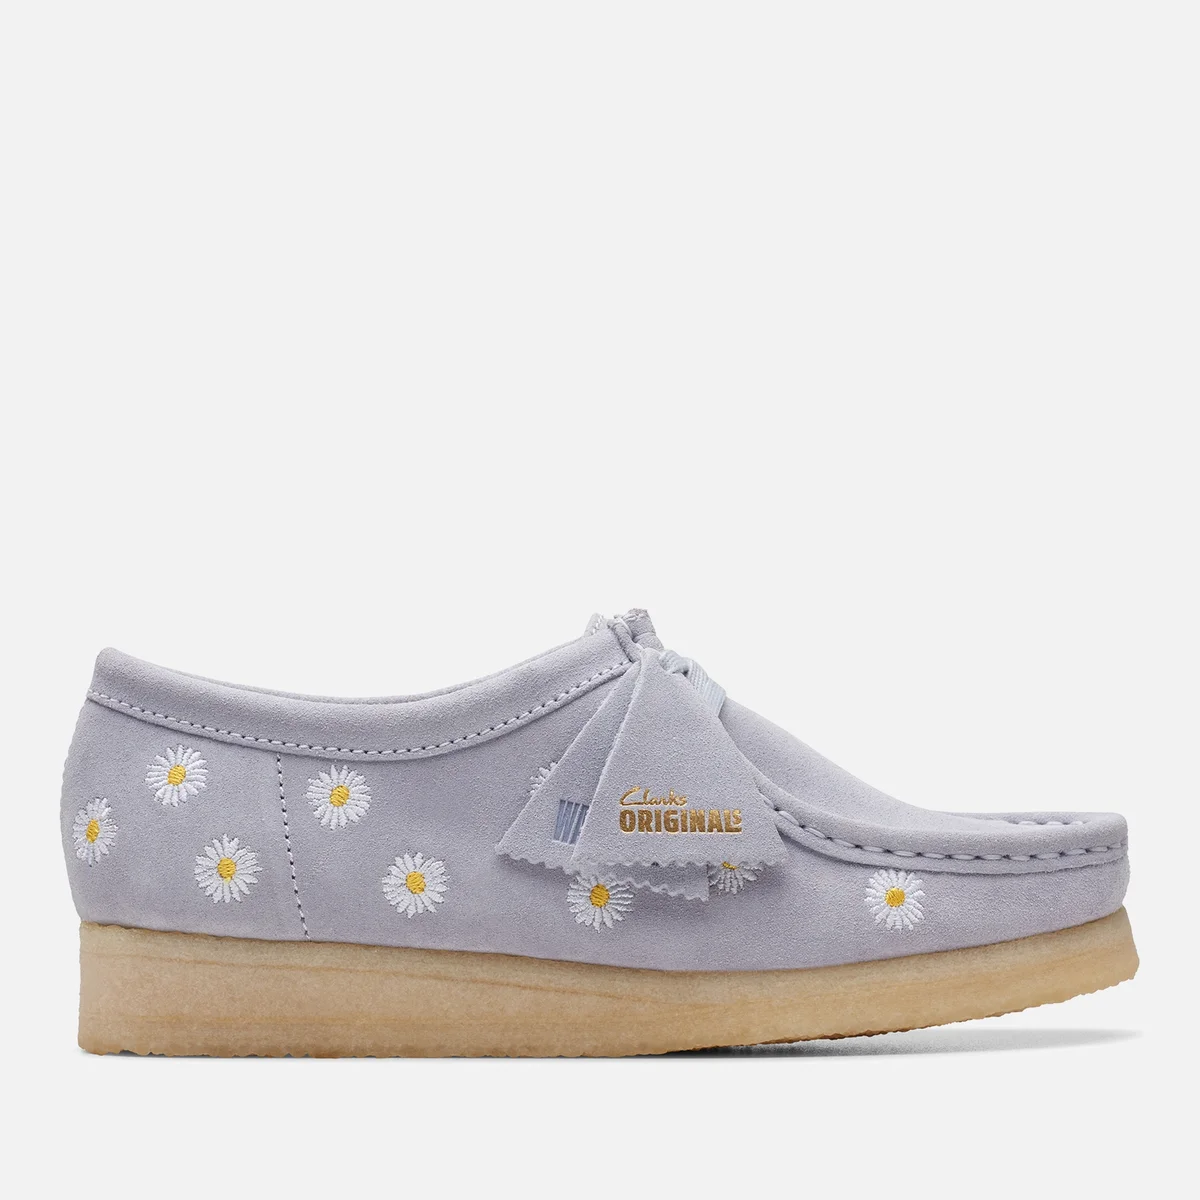 Clarks Originals Women's Embroidered Suede Wallabee Shoes Image 1